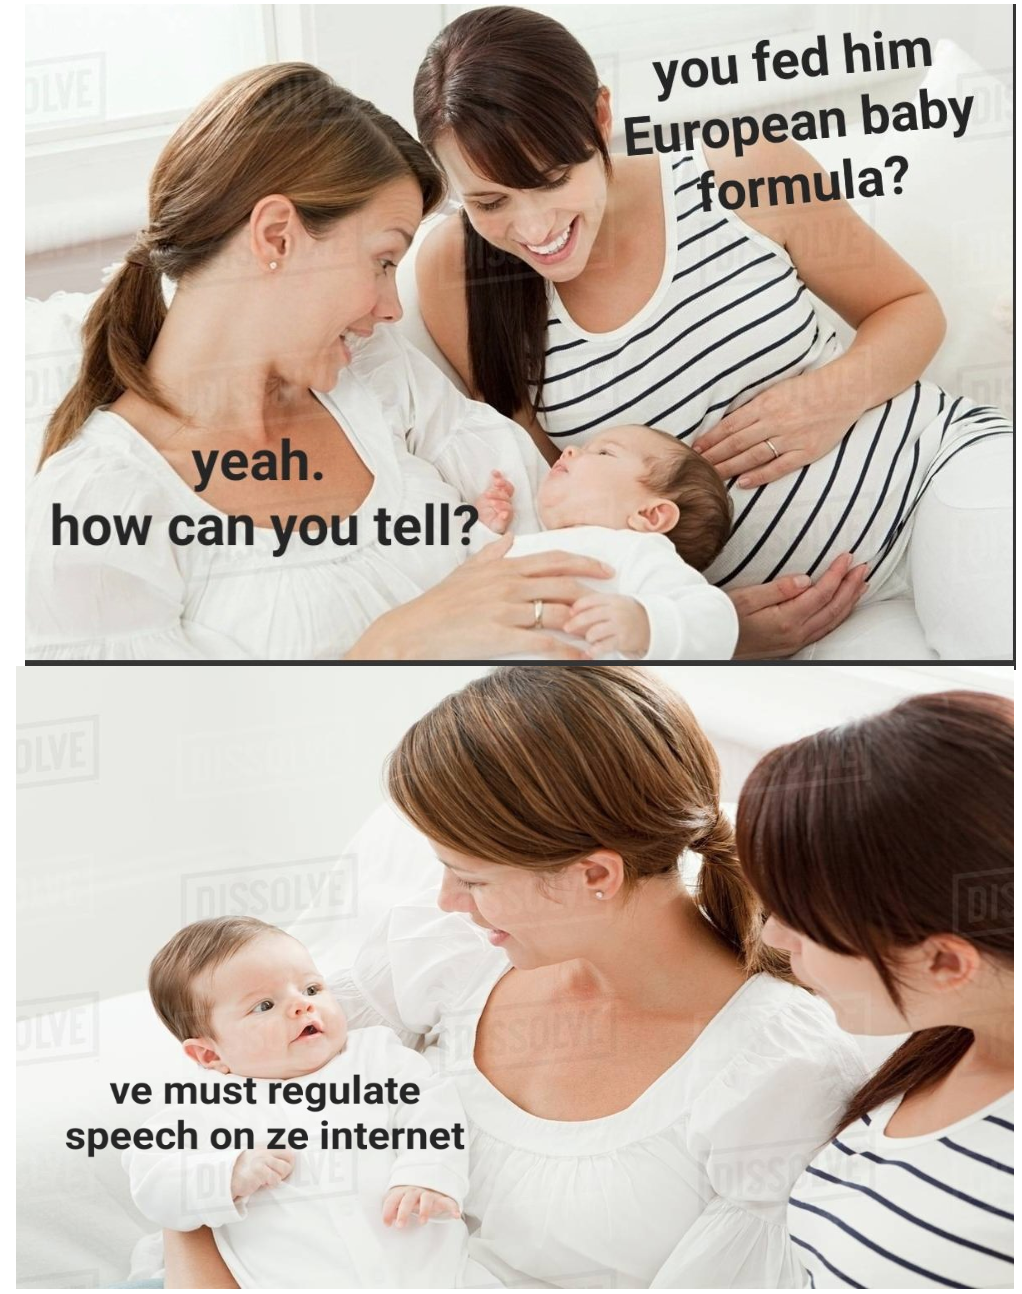 dank memes - funny memes - two women with child - yeah. how can you tell? Loissolve ve must regulate speech on ze internet you fed him European baby formula?